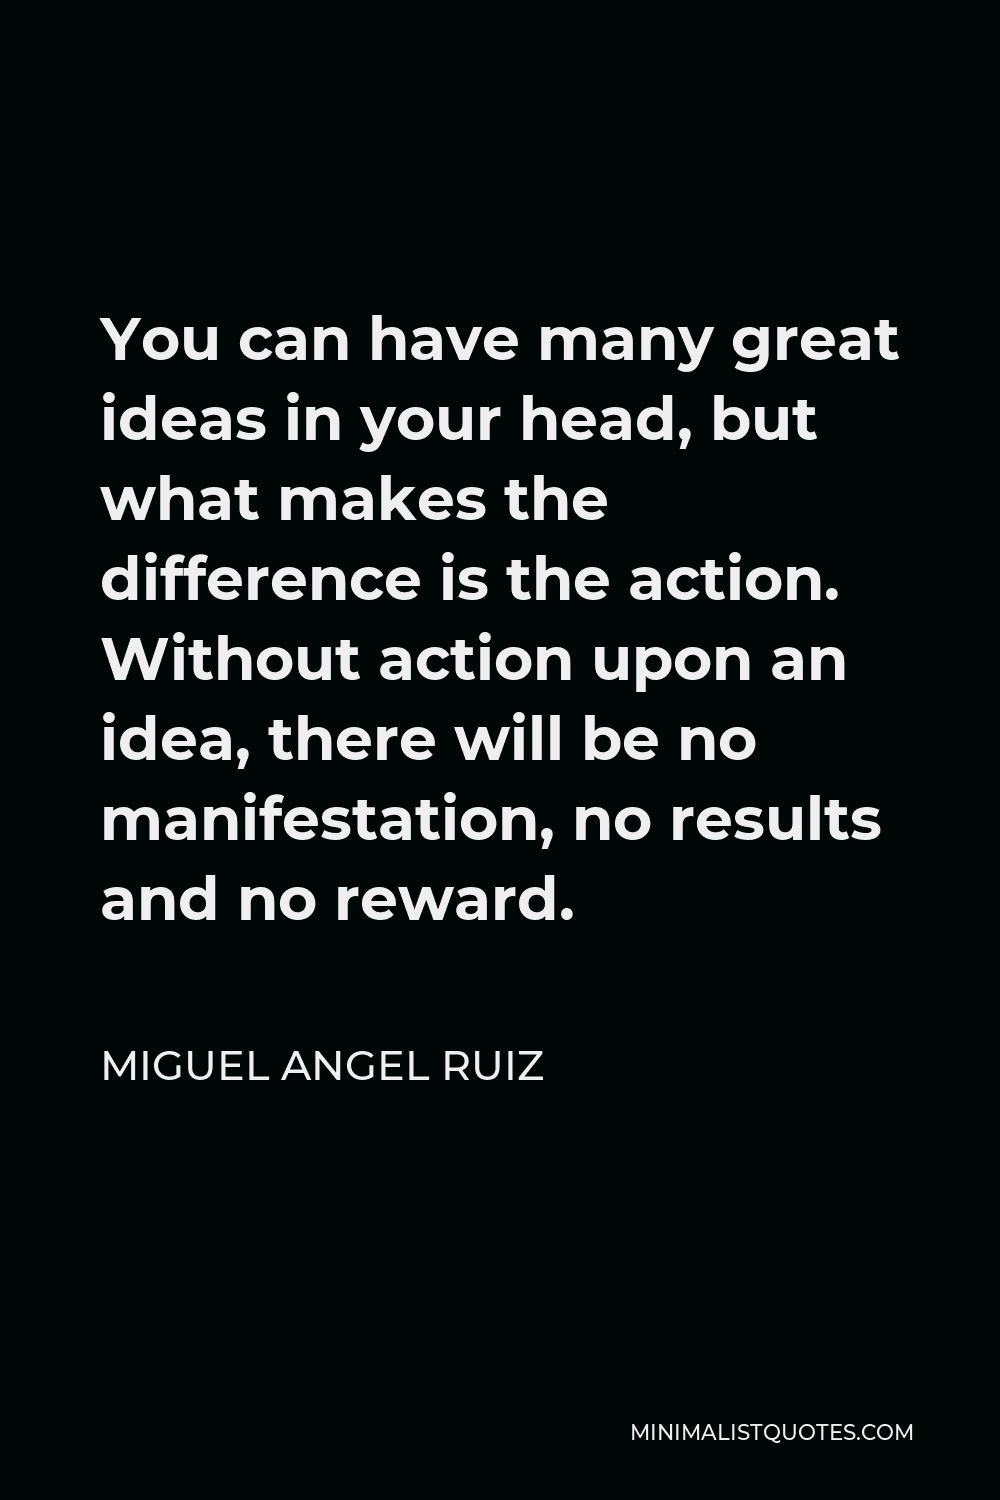 Miguel Angel Ruiz Quote - You can have many great ideas in your head, but what makes the difference is the action. Without action upon an idea, there will be no manifestation, no results and no reward.